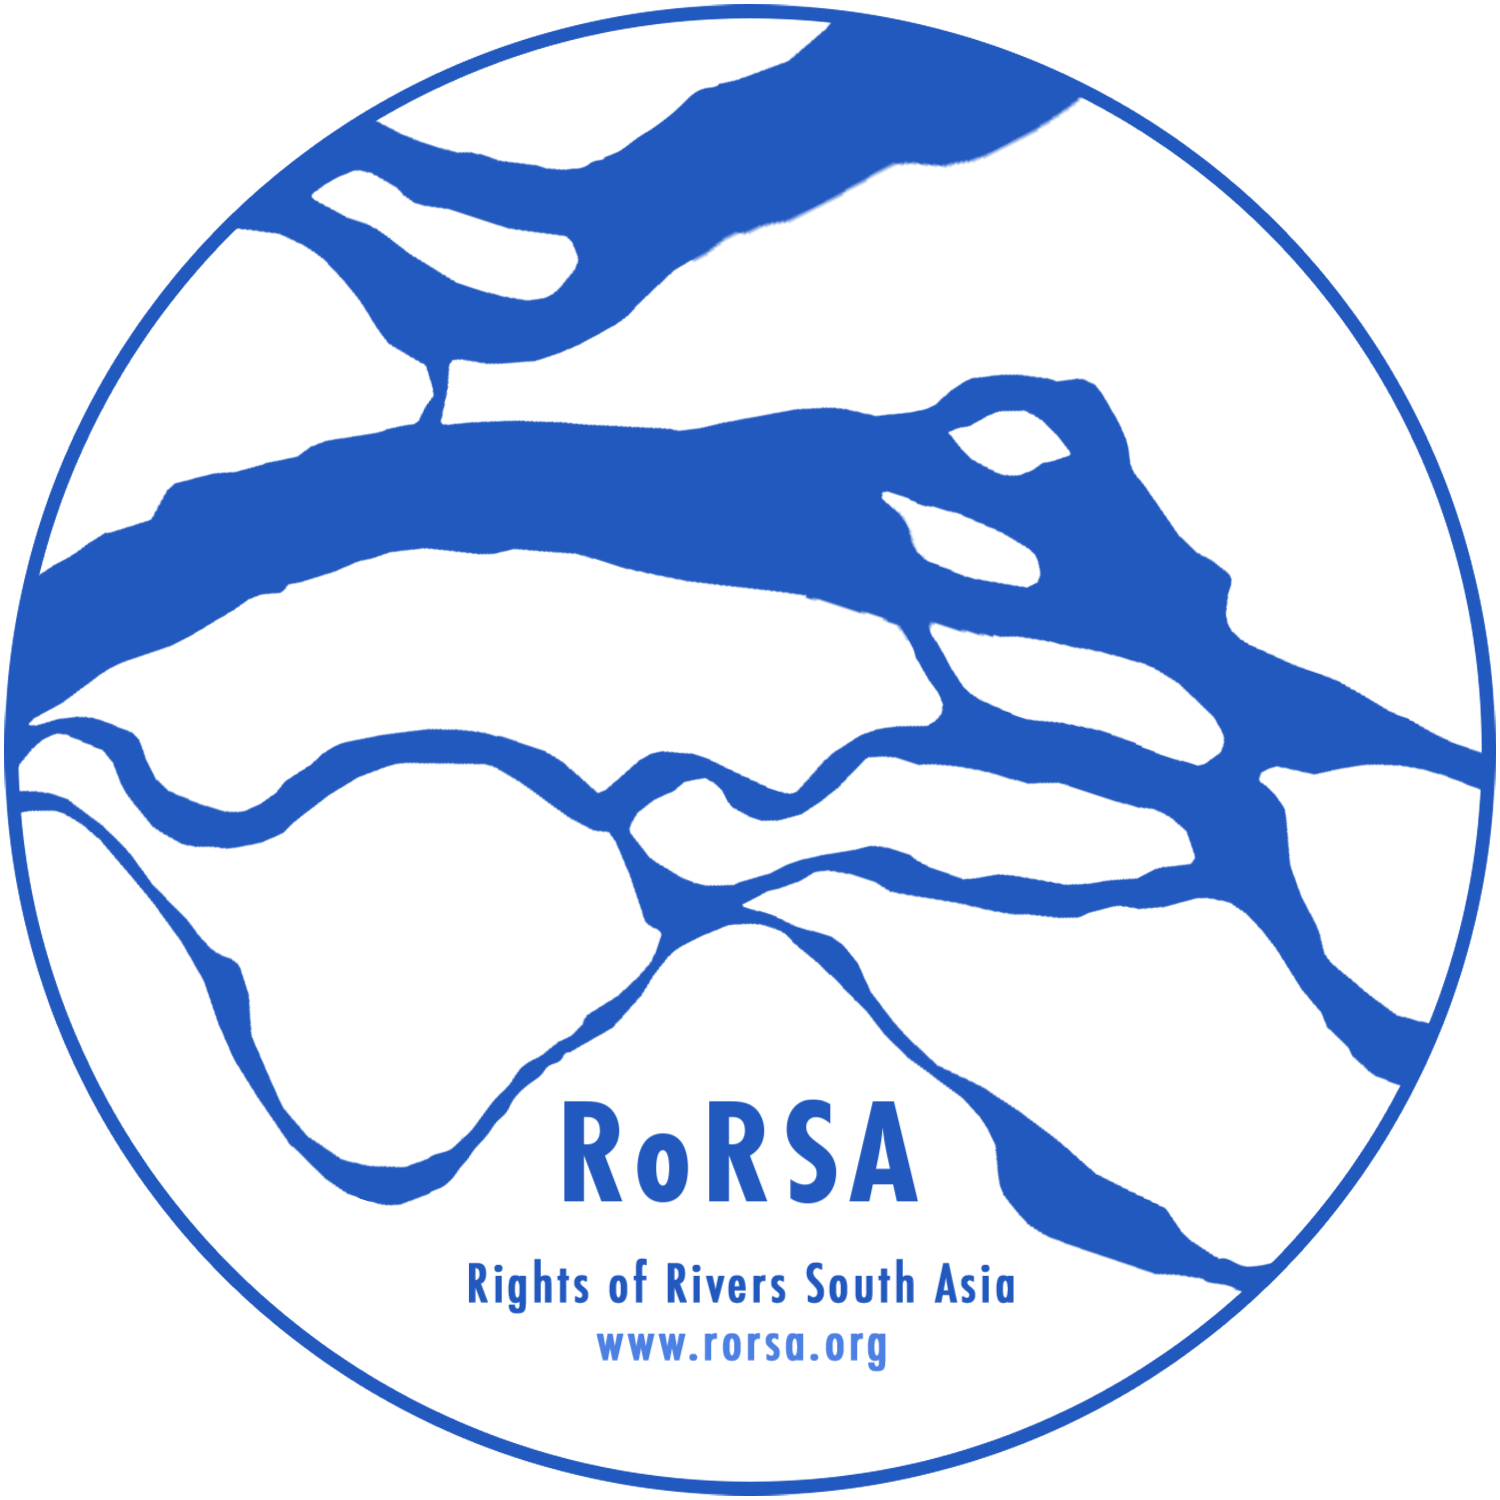 Rights of Rivers South Asia logo